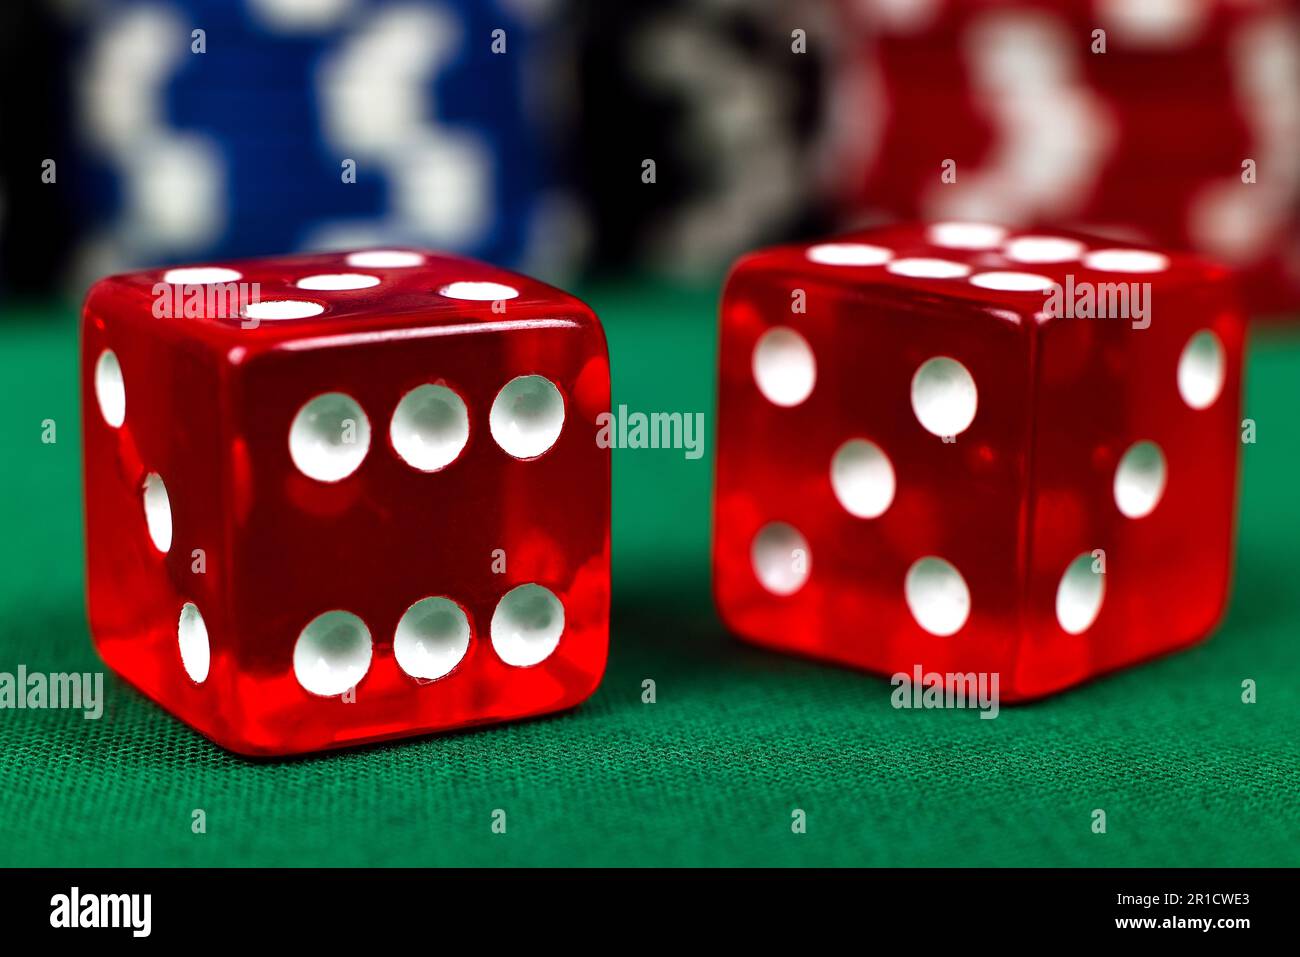 two red dice on green table, close up Stock Photo